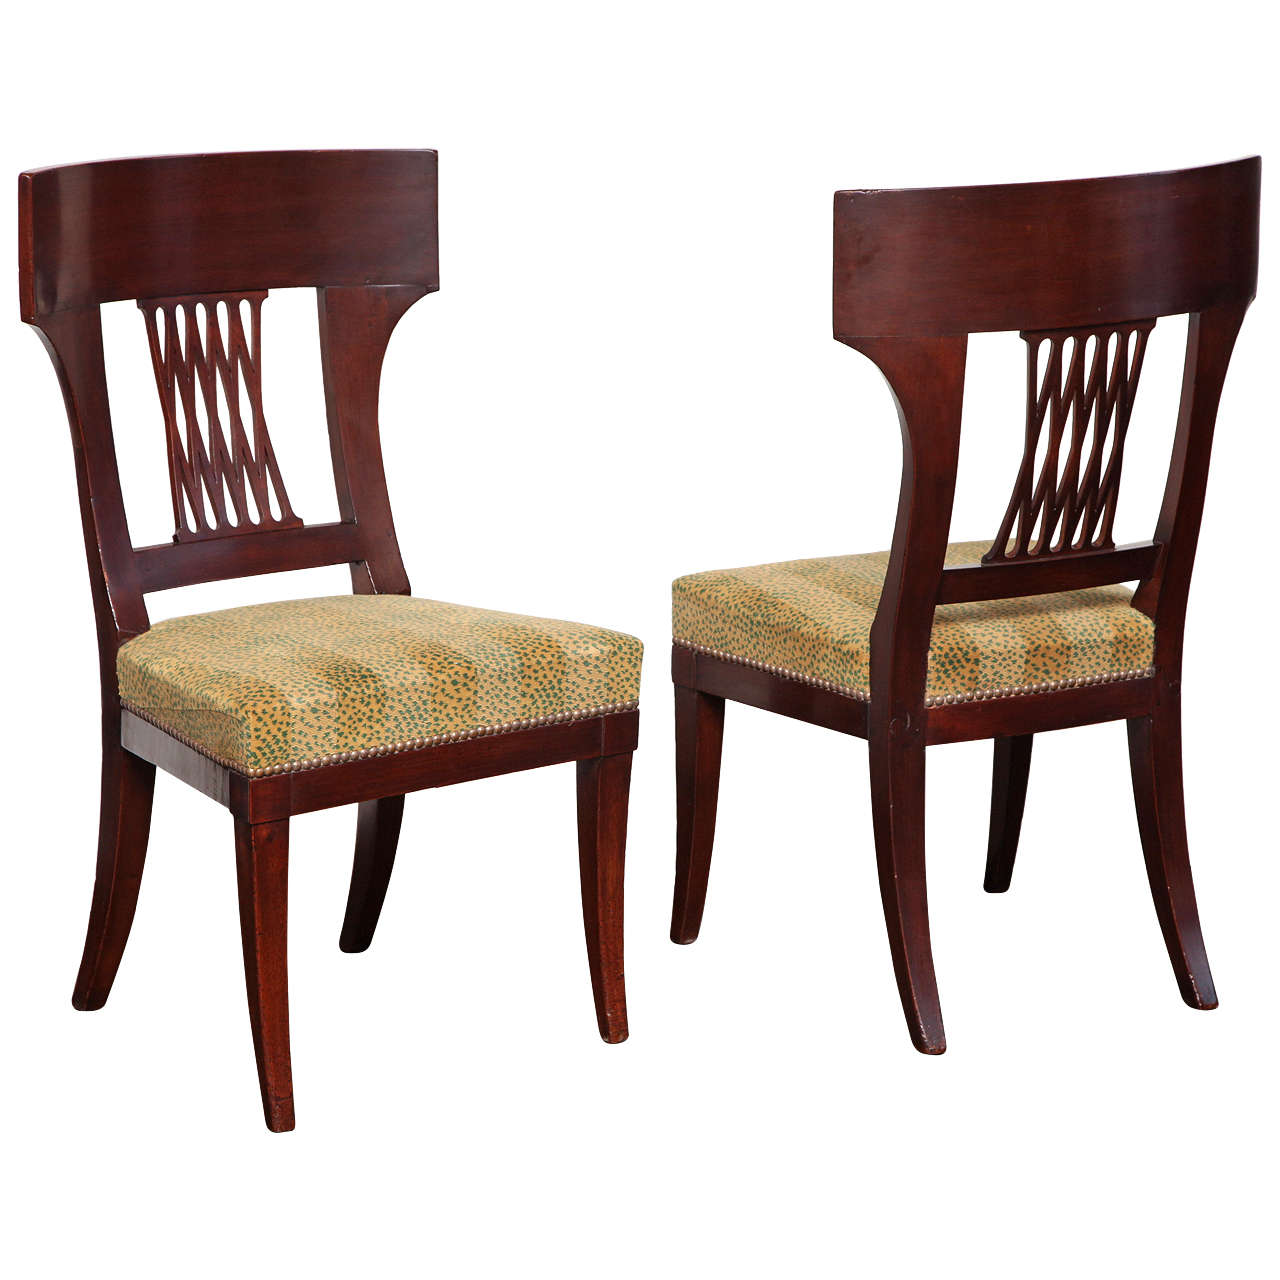 Pair of 19th Century French, Mahogany Side Chairs